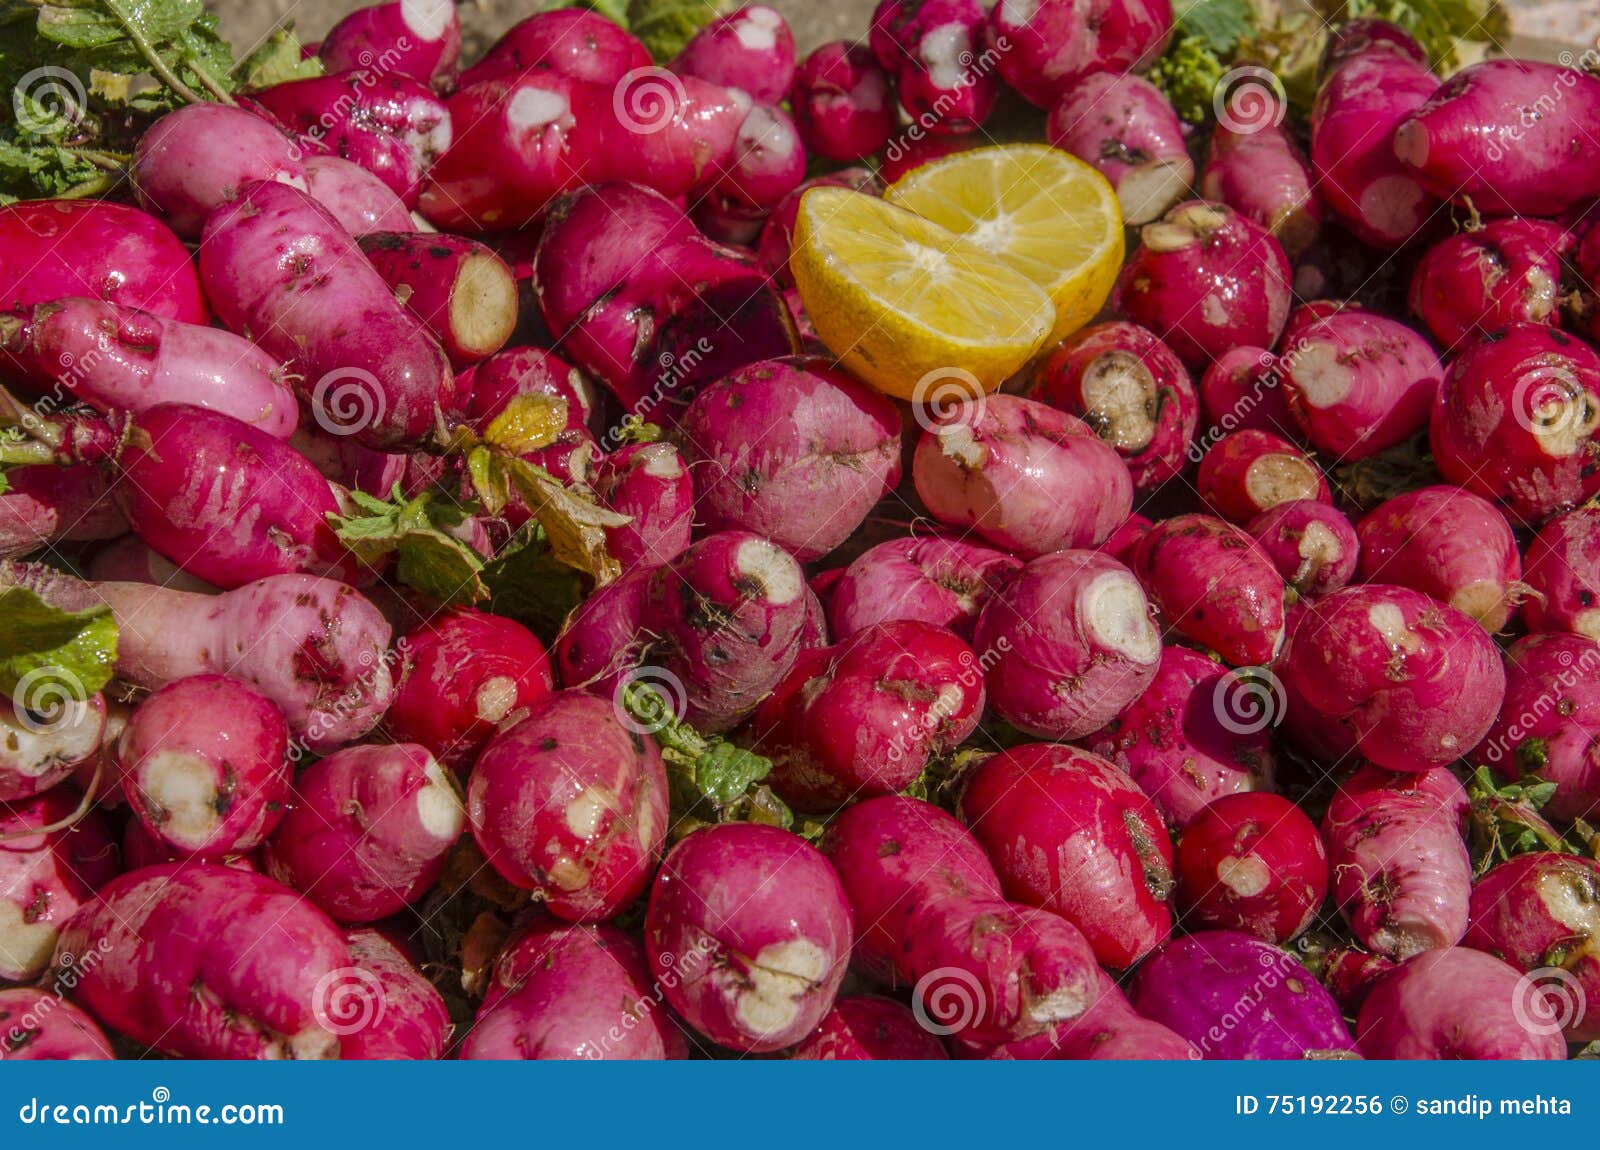 Red - Mooli Healthy Eating Vegetarian - Stock Photo - Image of cooking